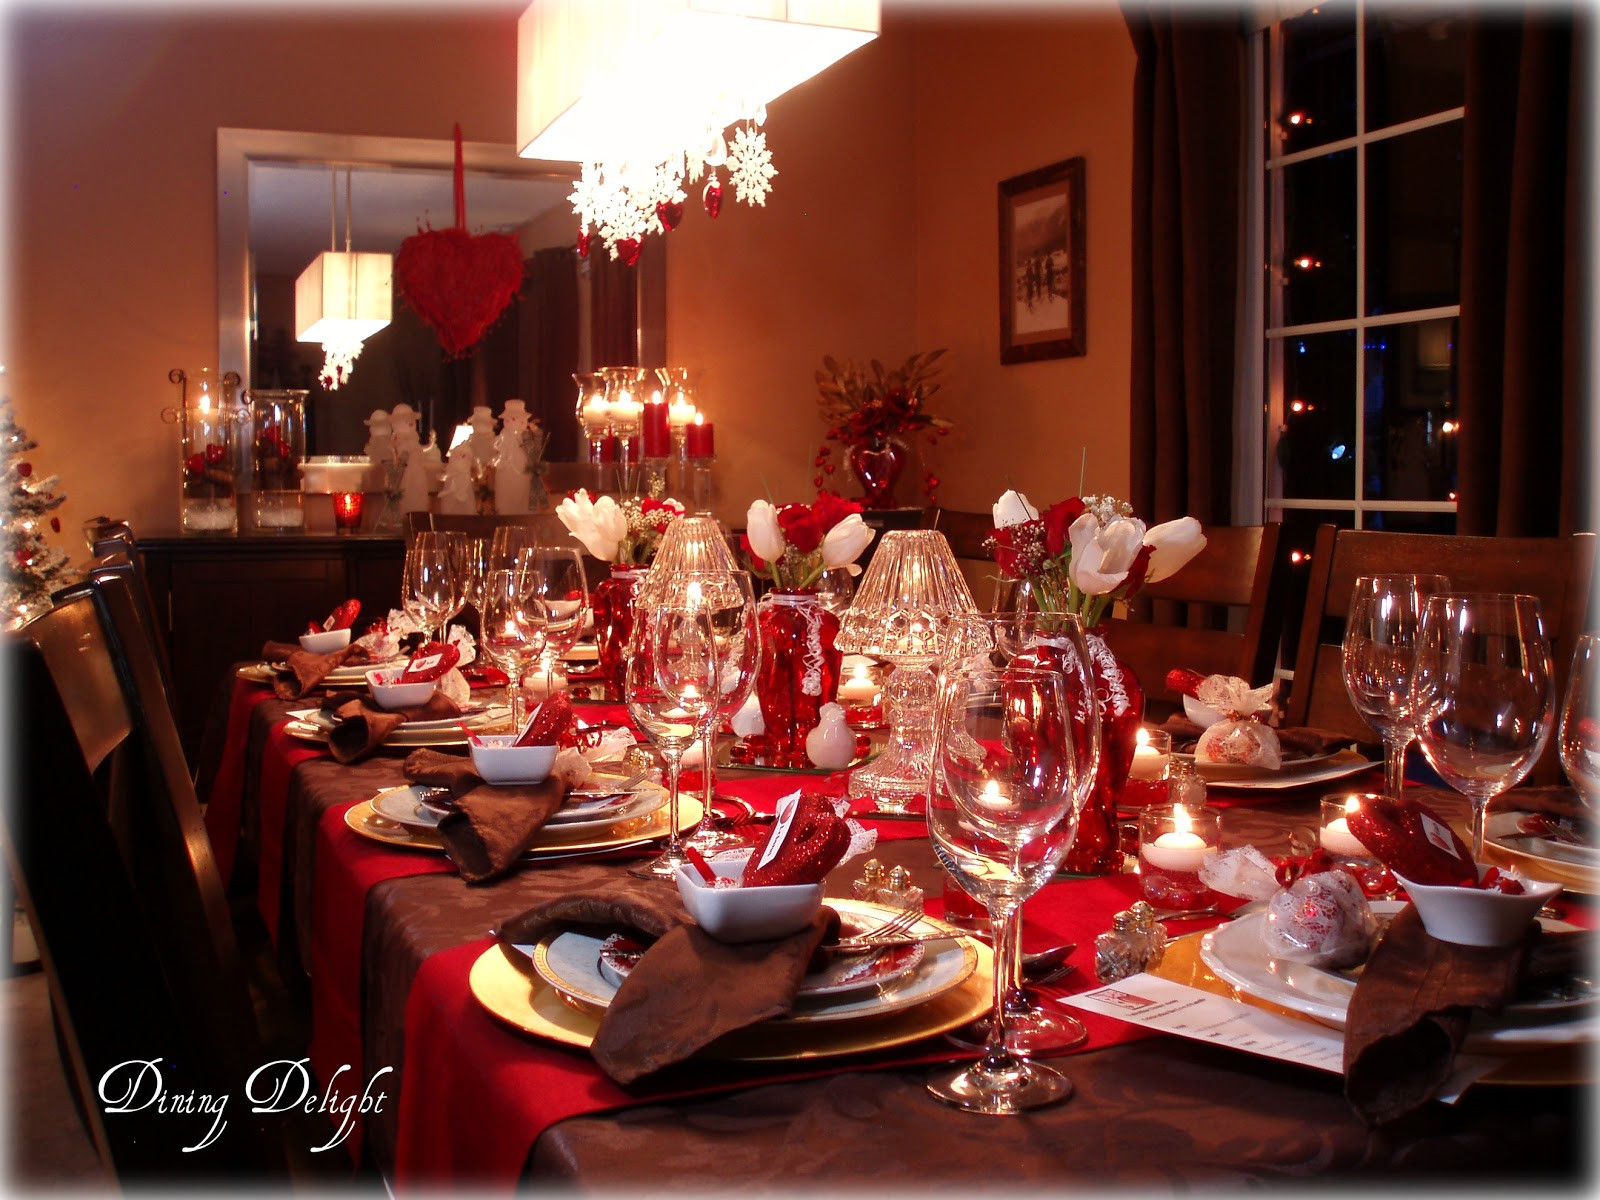 Valentine Dinner For Family
 Dining Delight Red Rose and Chocolate Brown for Valentine s